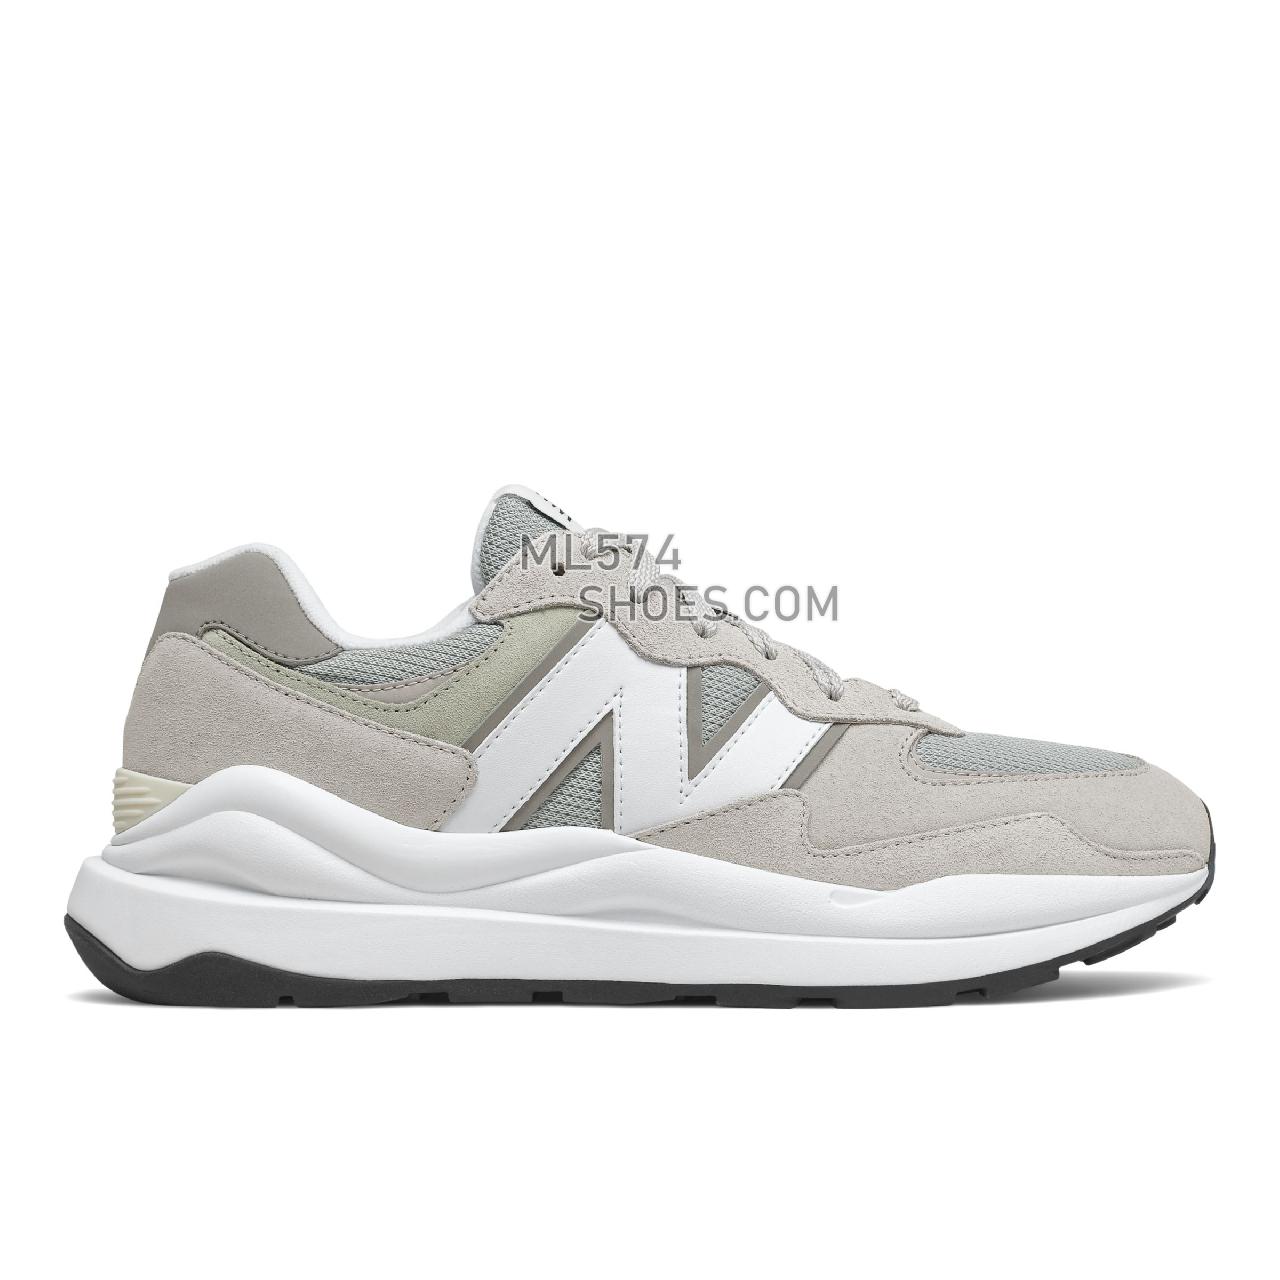 New Balance 57/40 - Men's Sport Style Sneakers - Rain Cloud with Nb White - M5740CA